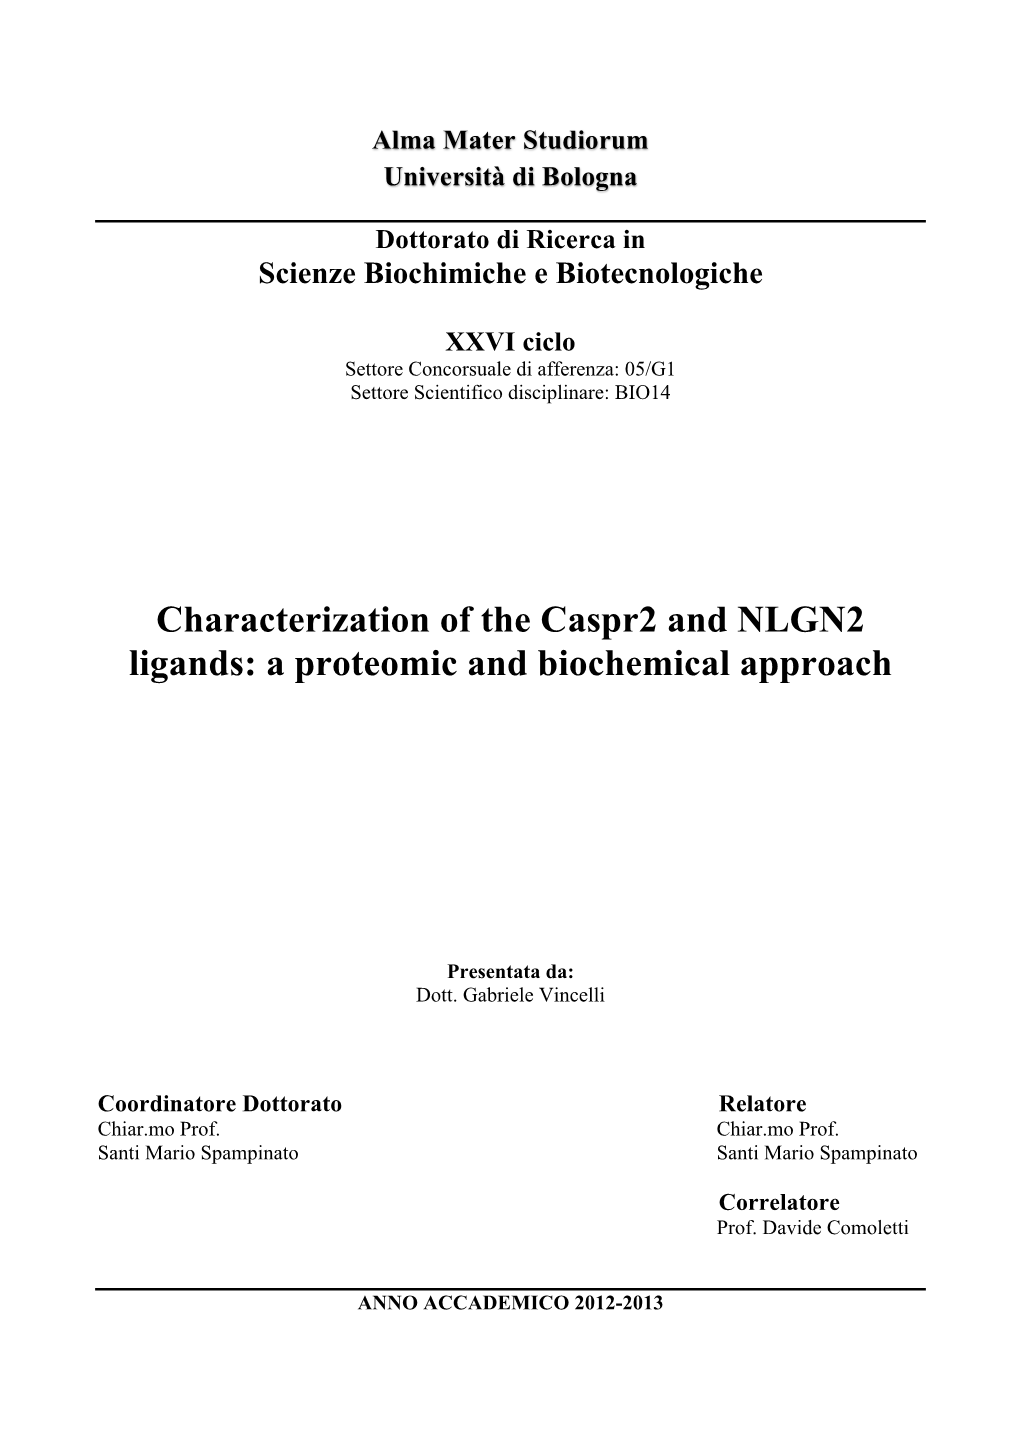 Characterization of the Caspr2 and NLGN2 Ligands: a Proteomic and Biochemical Approach